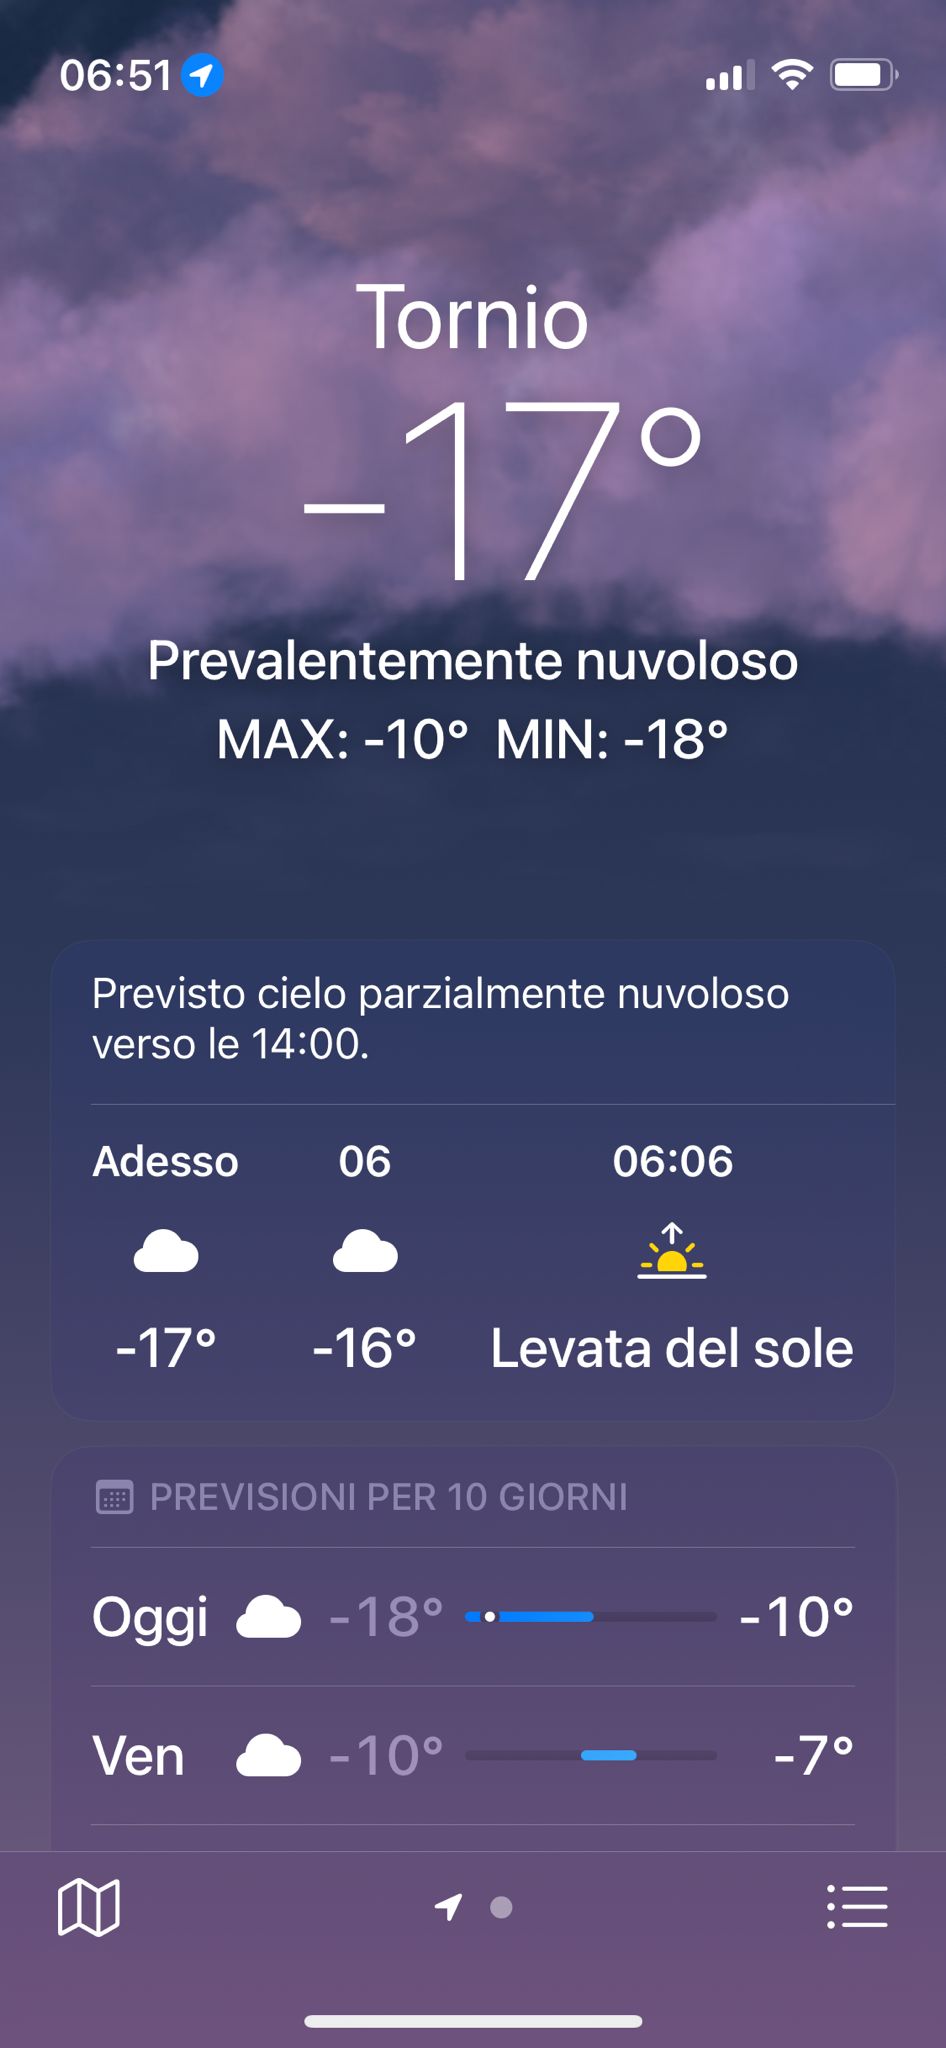 weather forecast of Tornio saying -17° outside